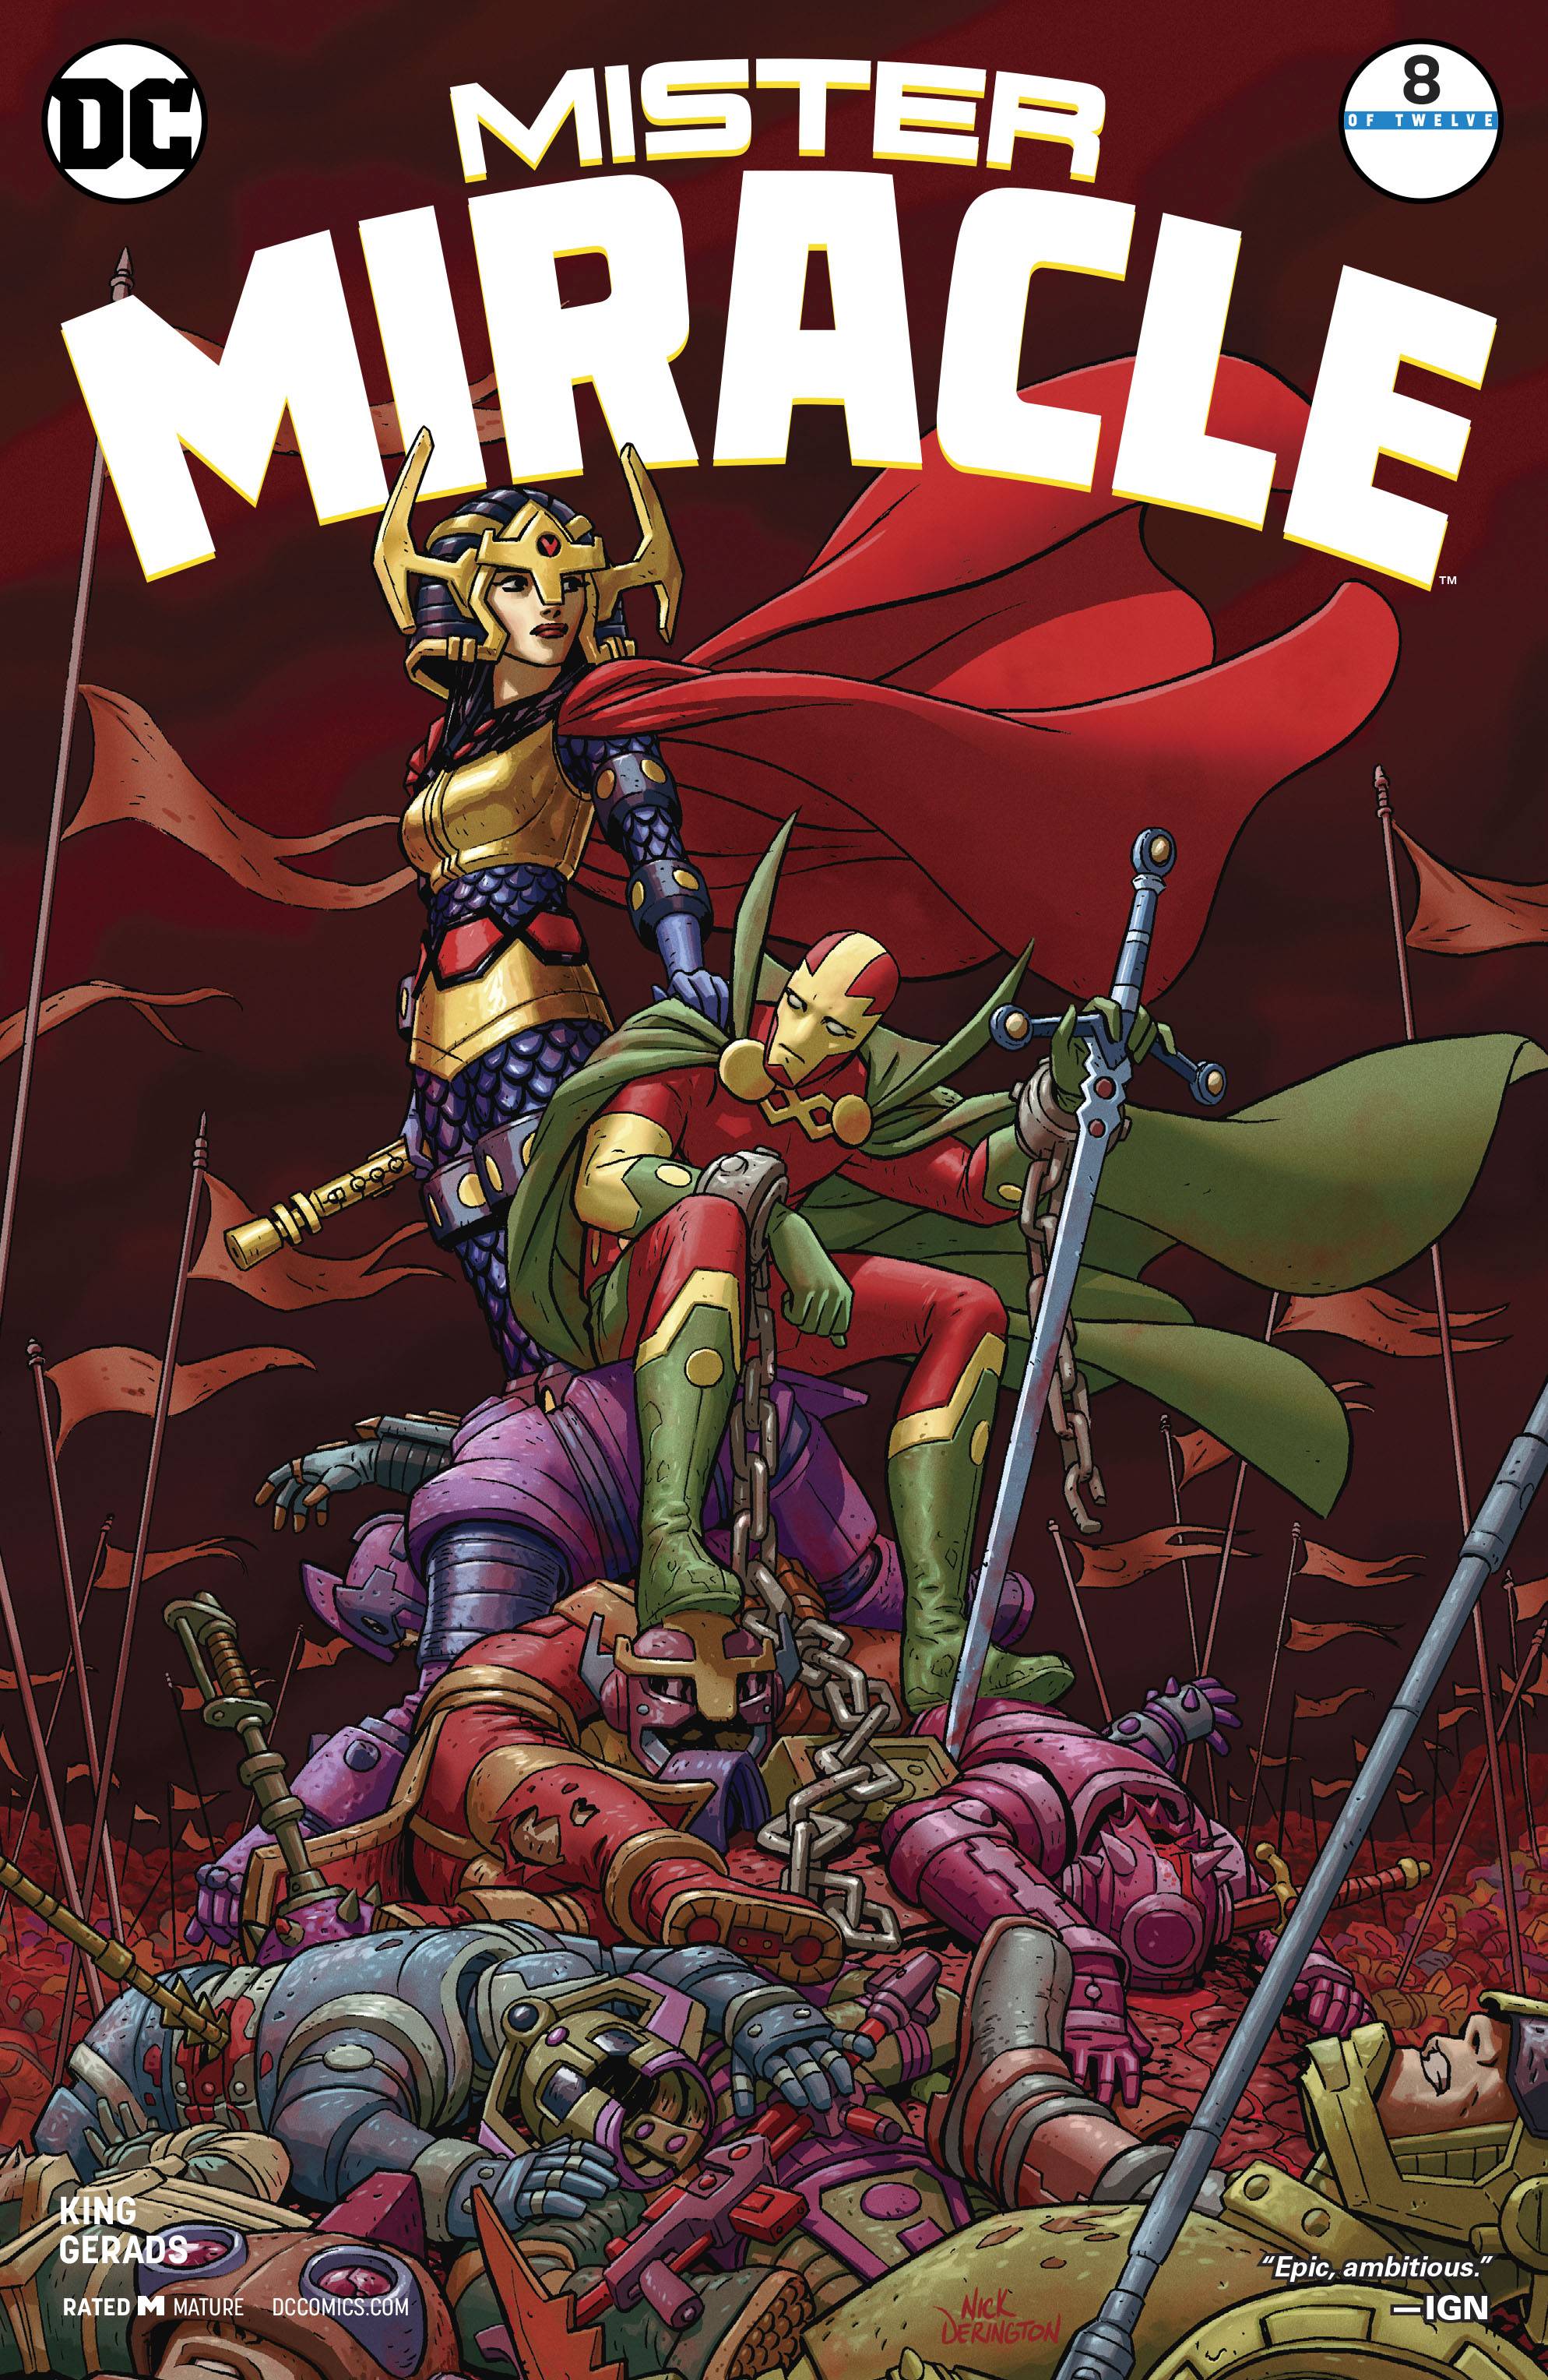 Mister Miracle #8 (Of 12) (Mature)